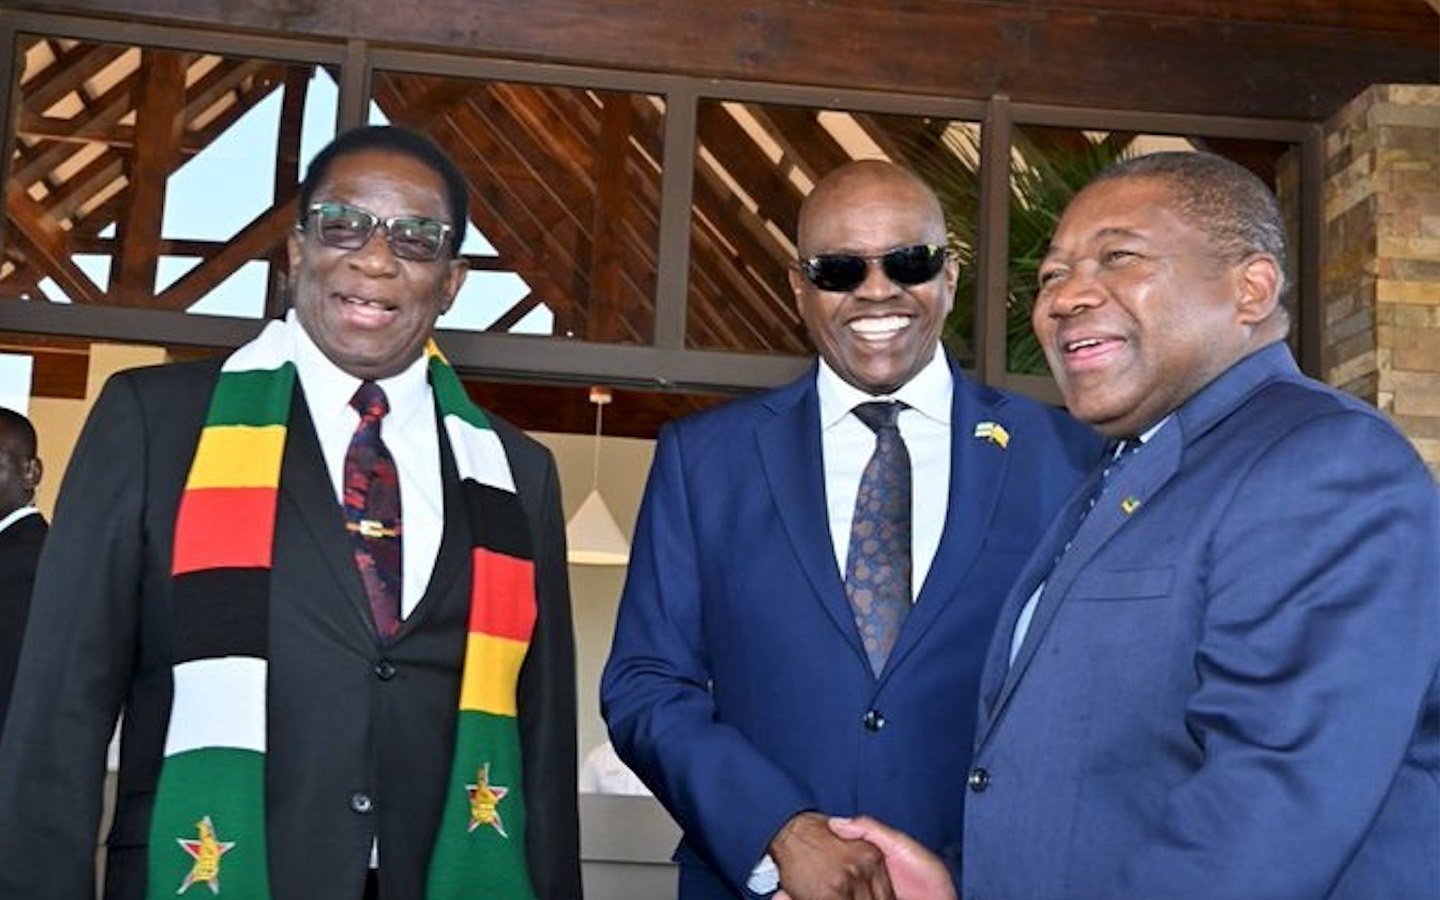 Leaders in Southern Africa sign major rail and port deal